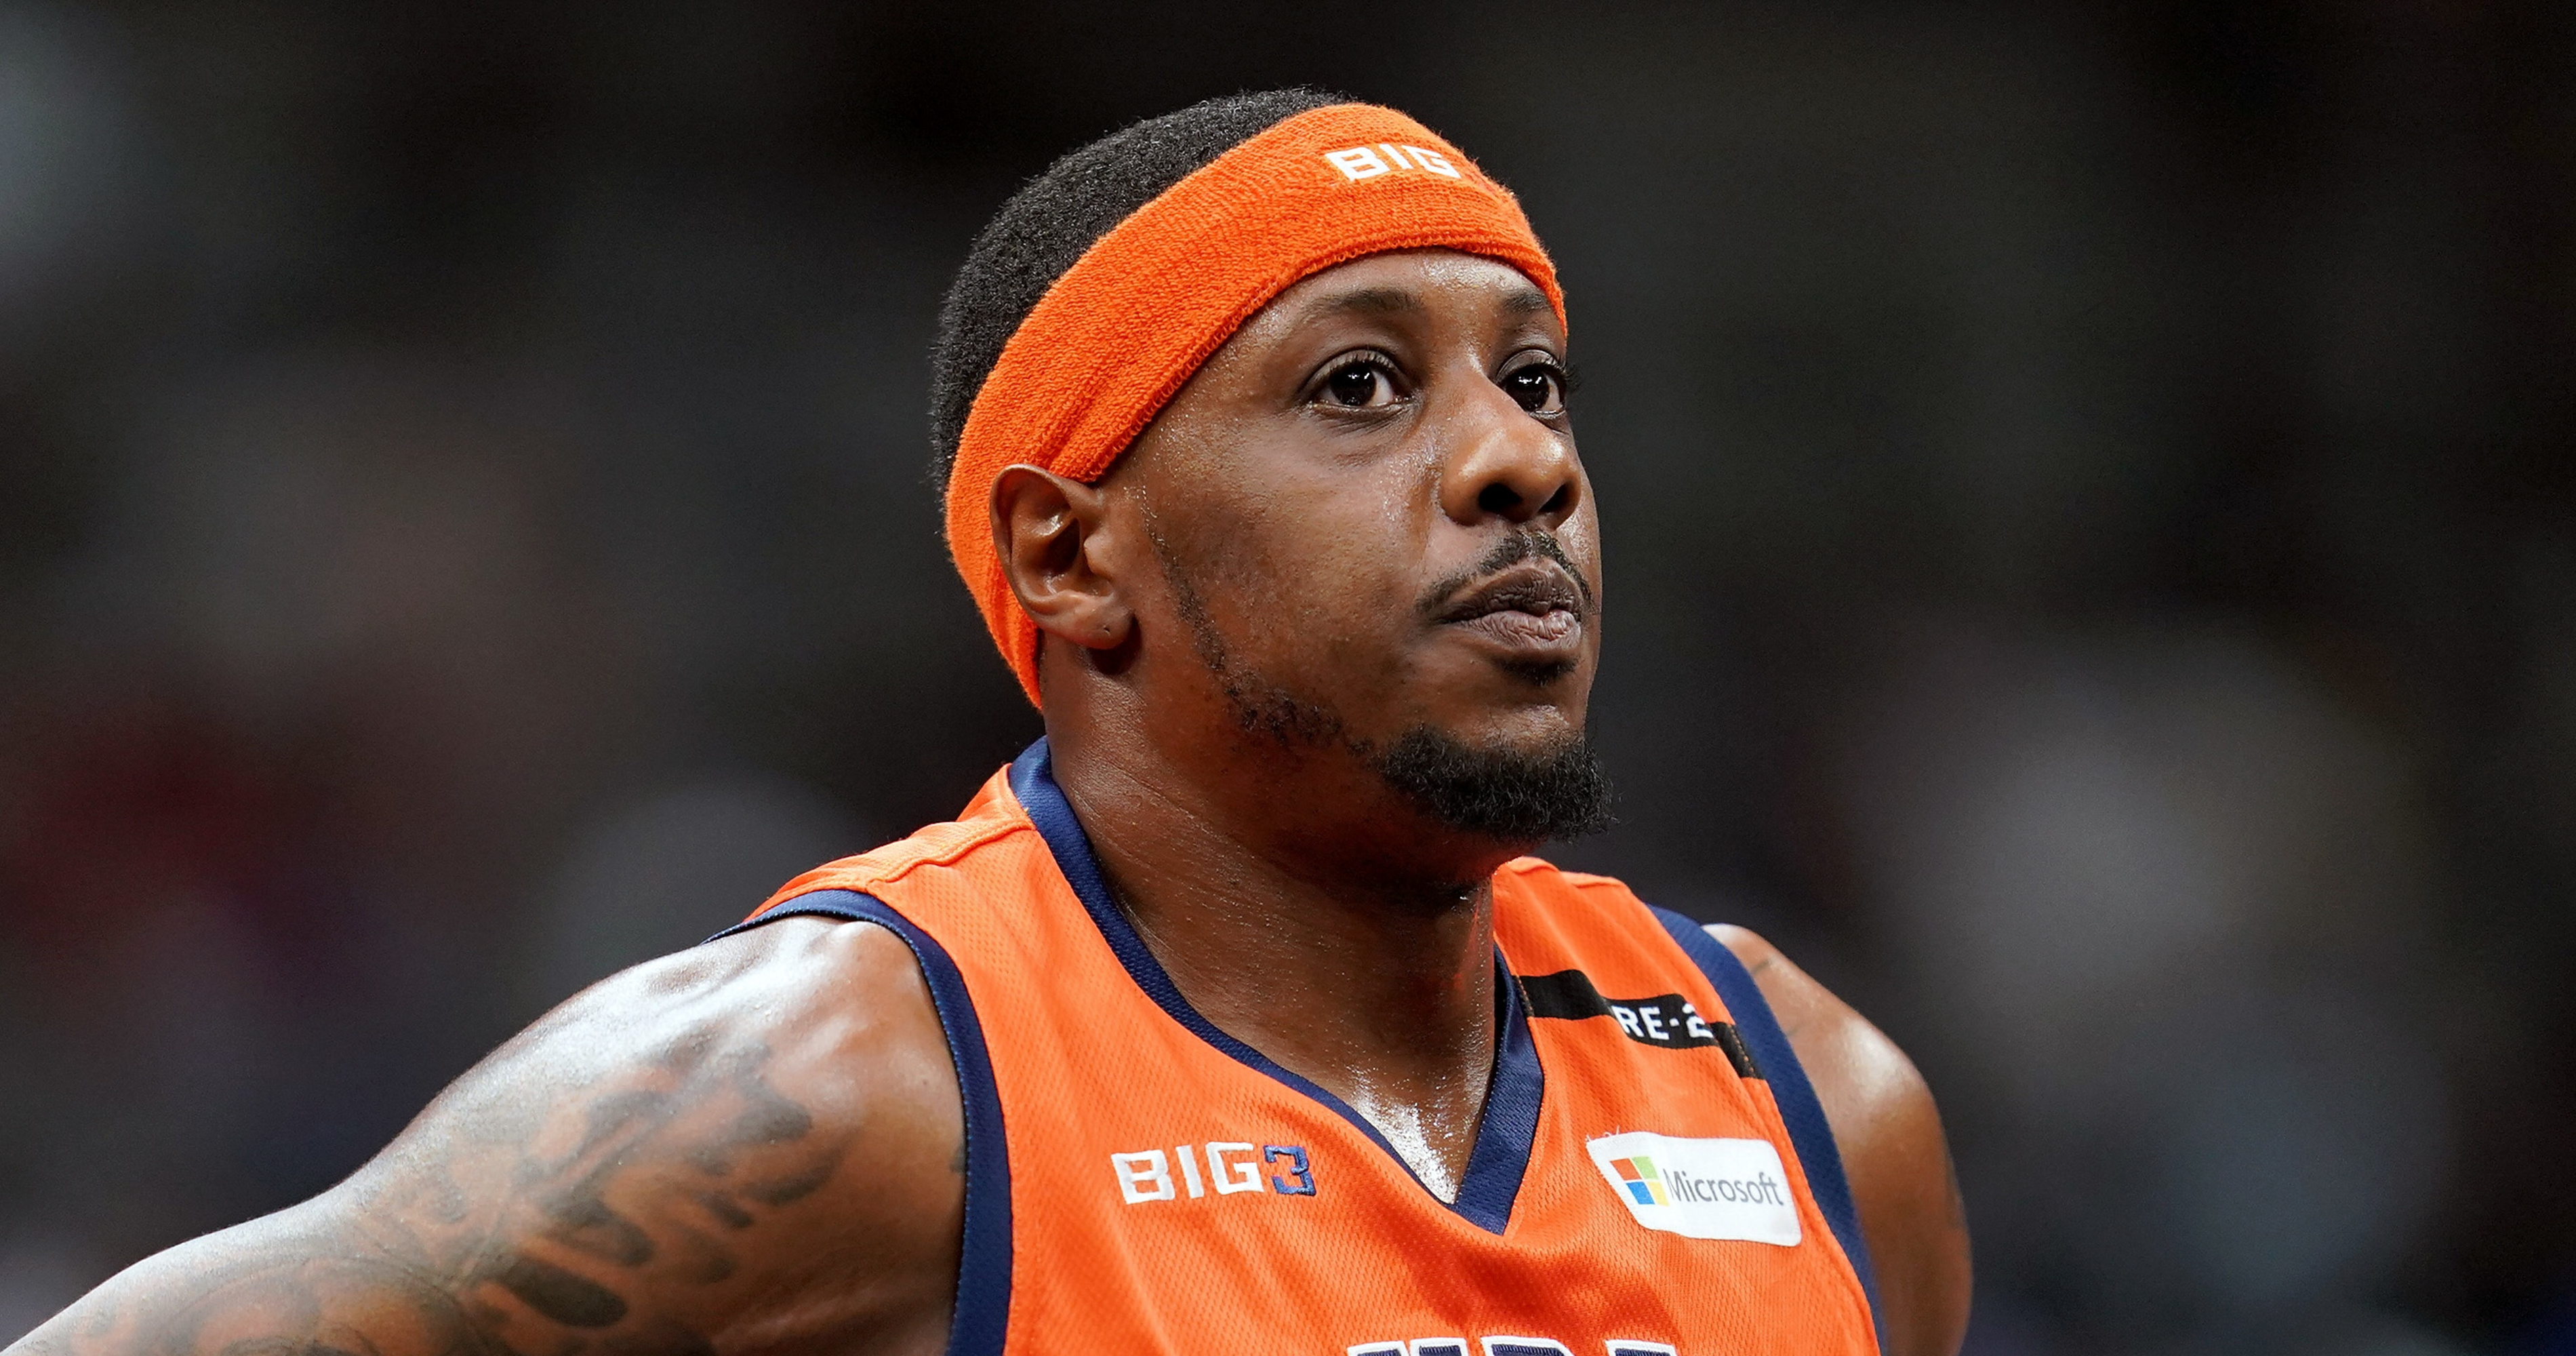 Anchorage's Mario Chalmers signs 10-day contract to return to